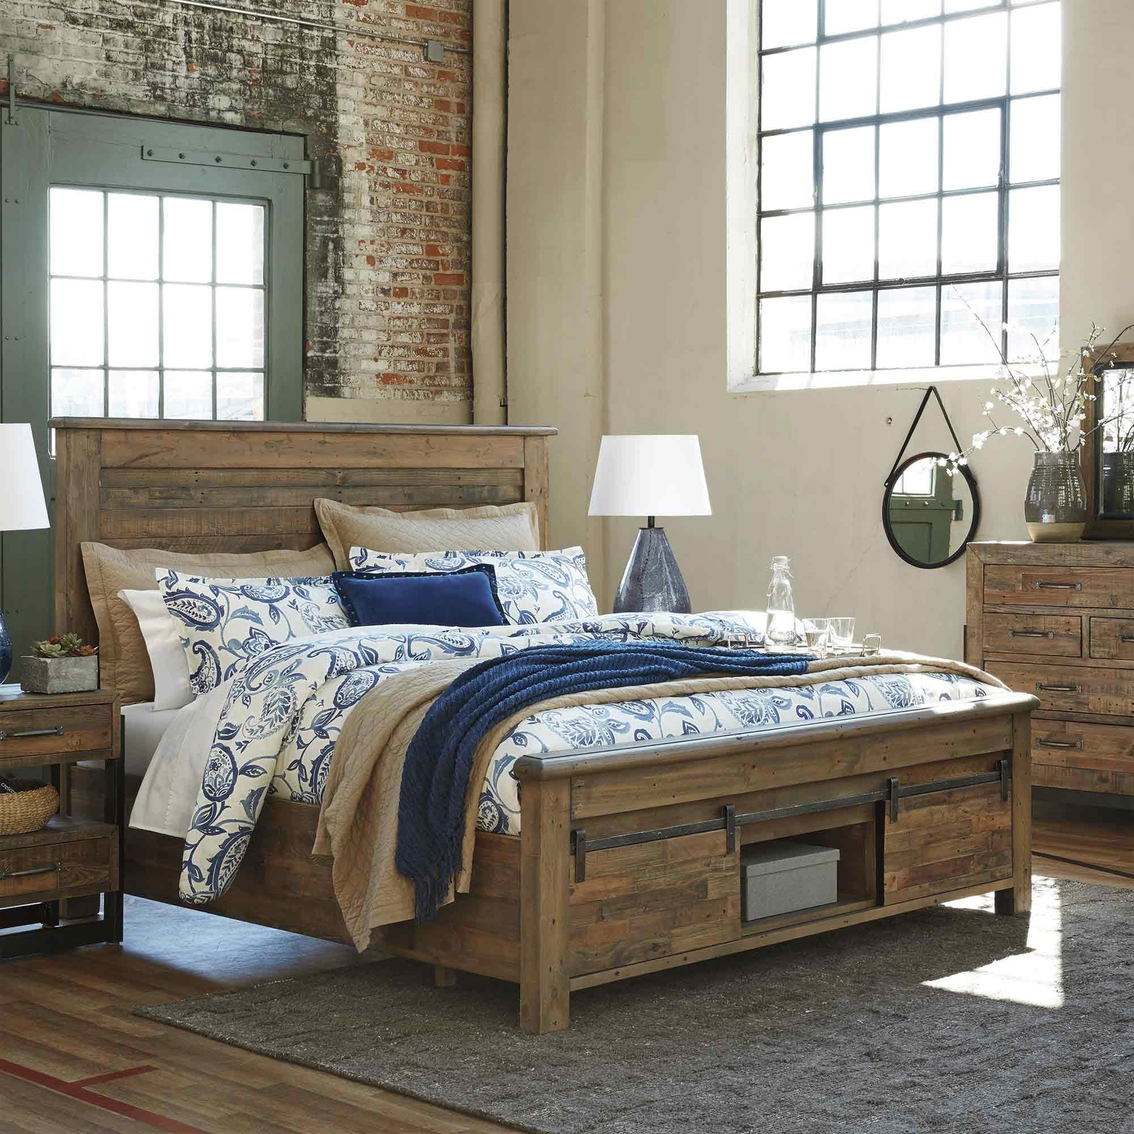 Signature Design by Ashley Sommerford Storage Bed - Image 4 of 4